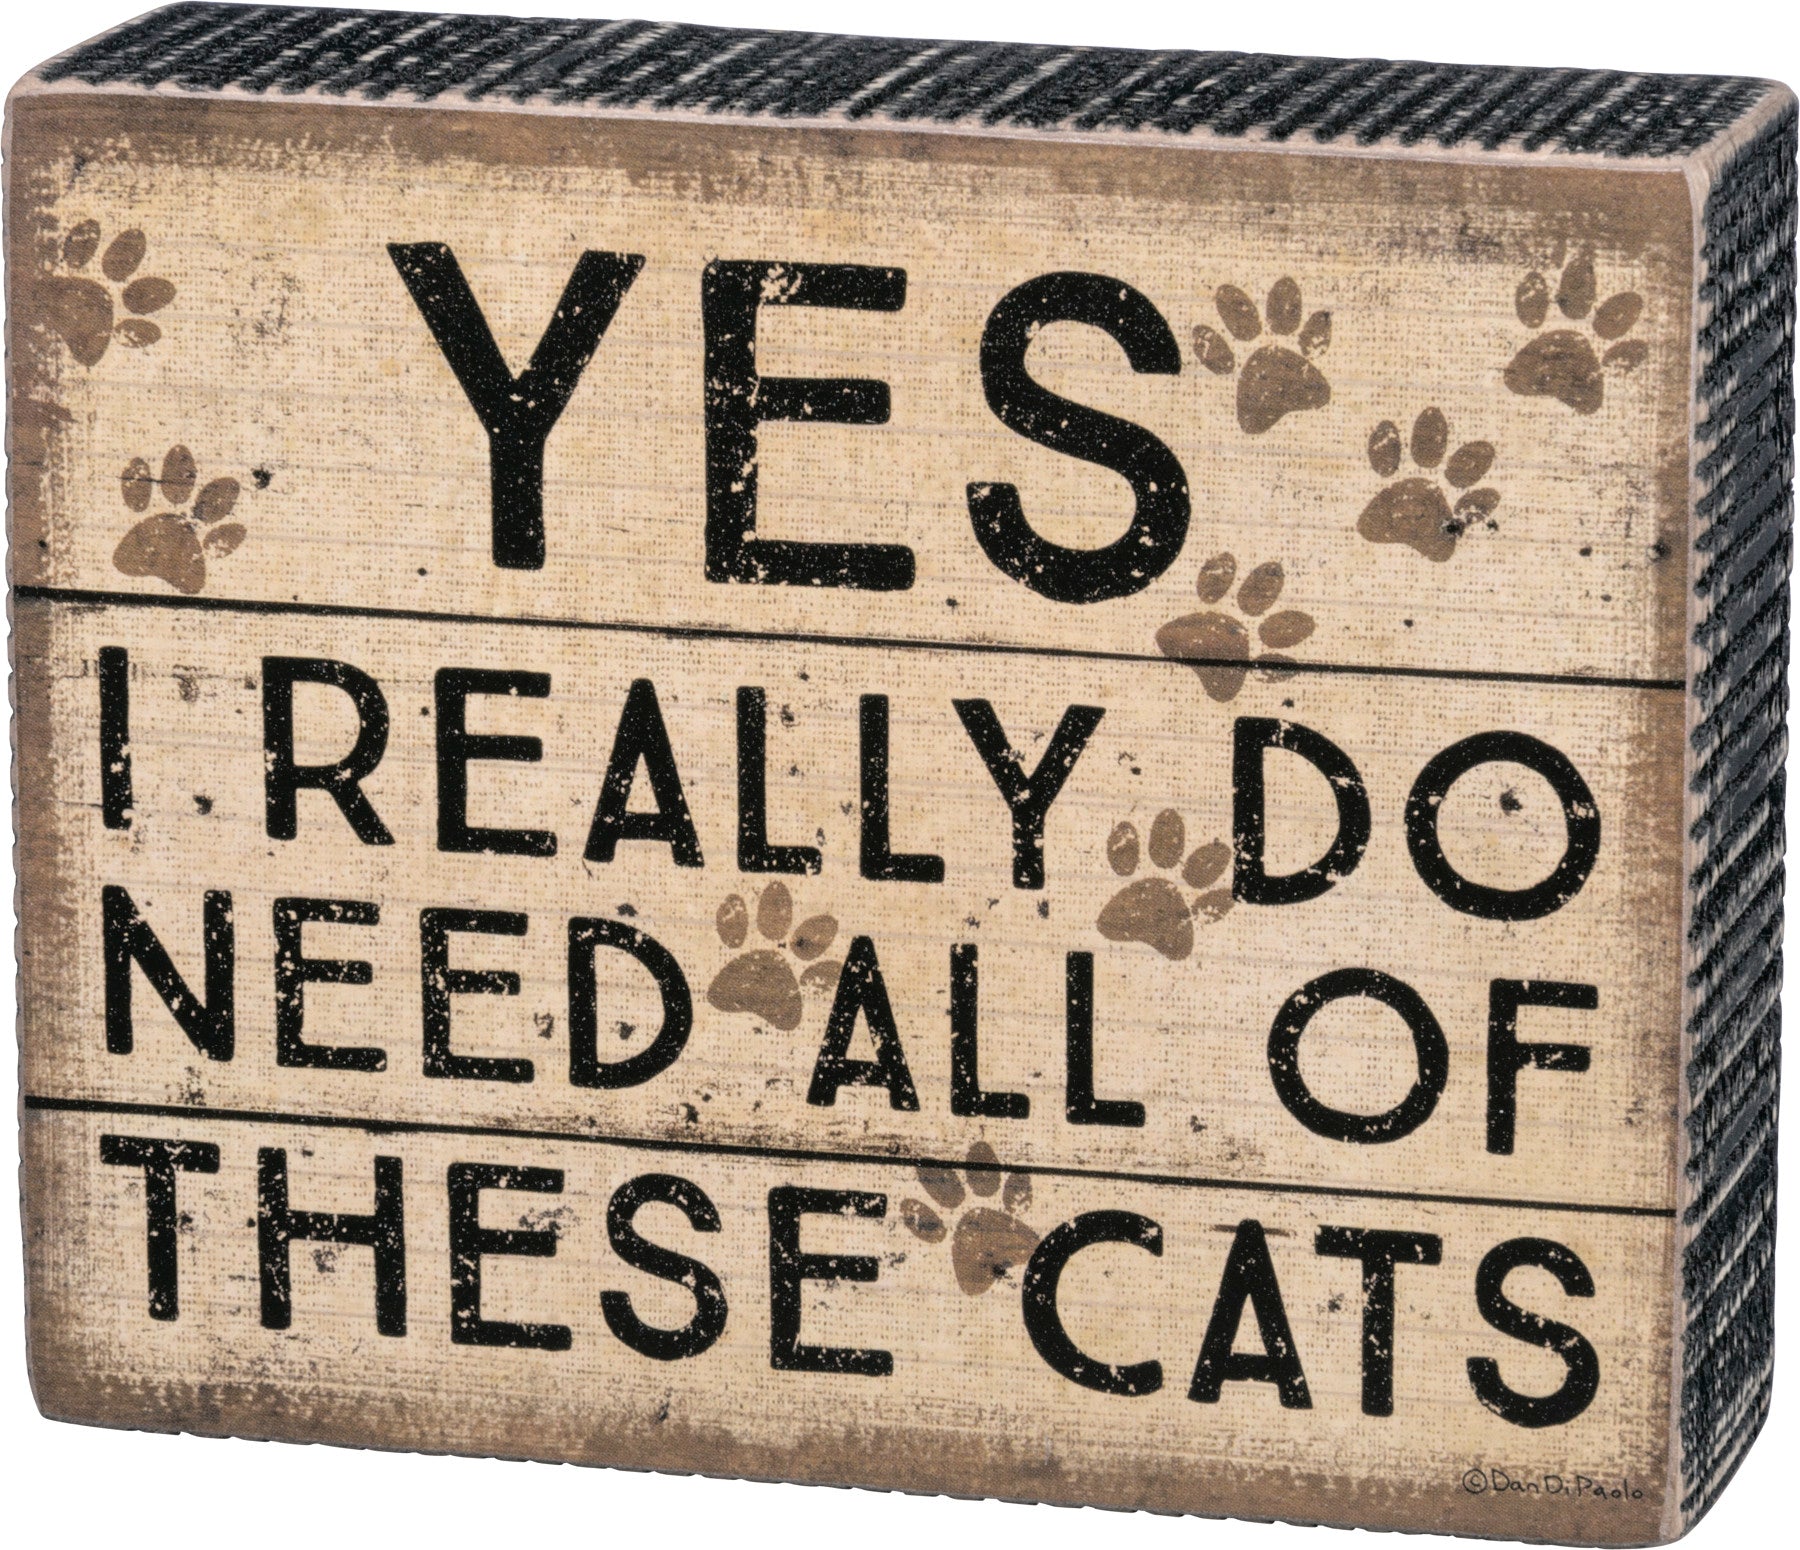 Need These Cats Box Sign